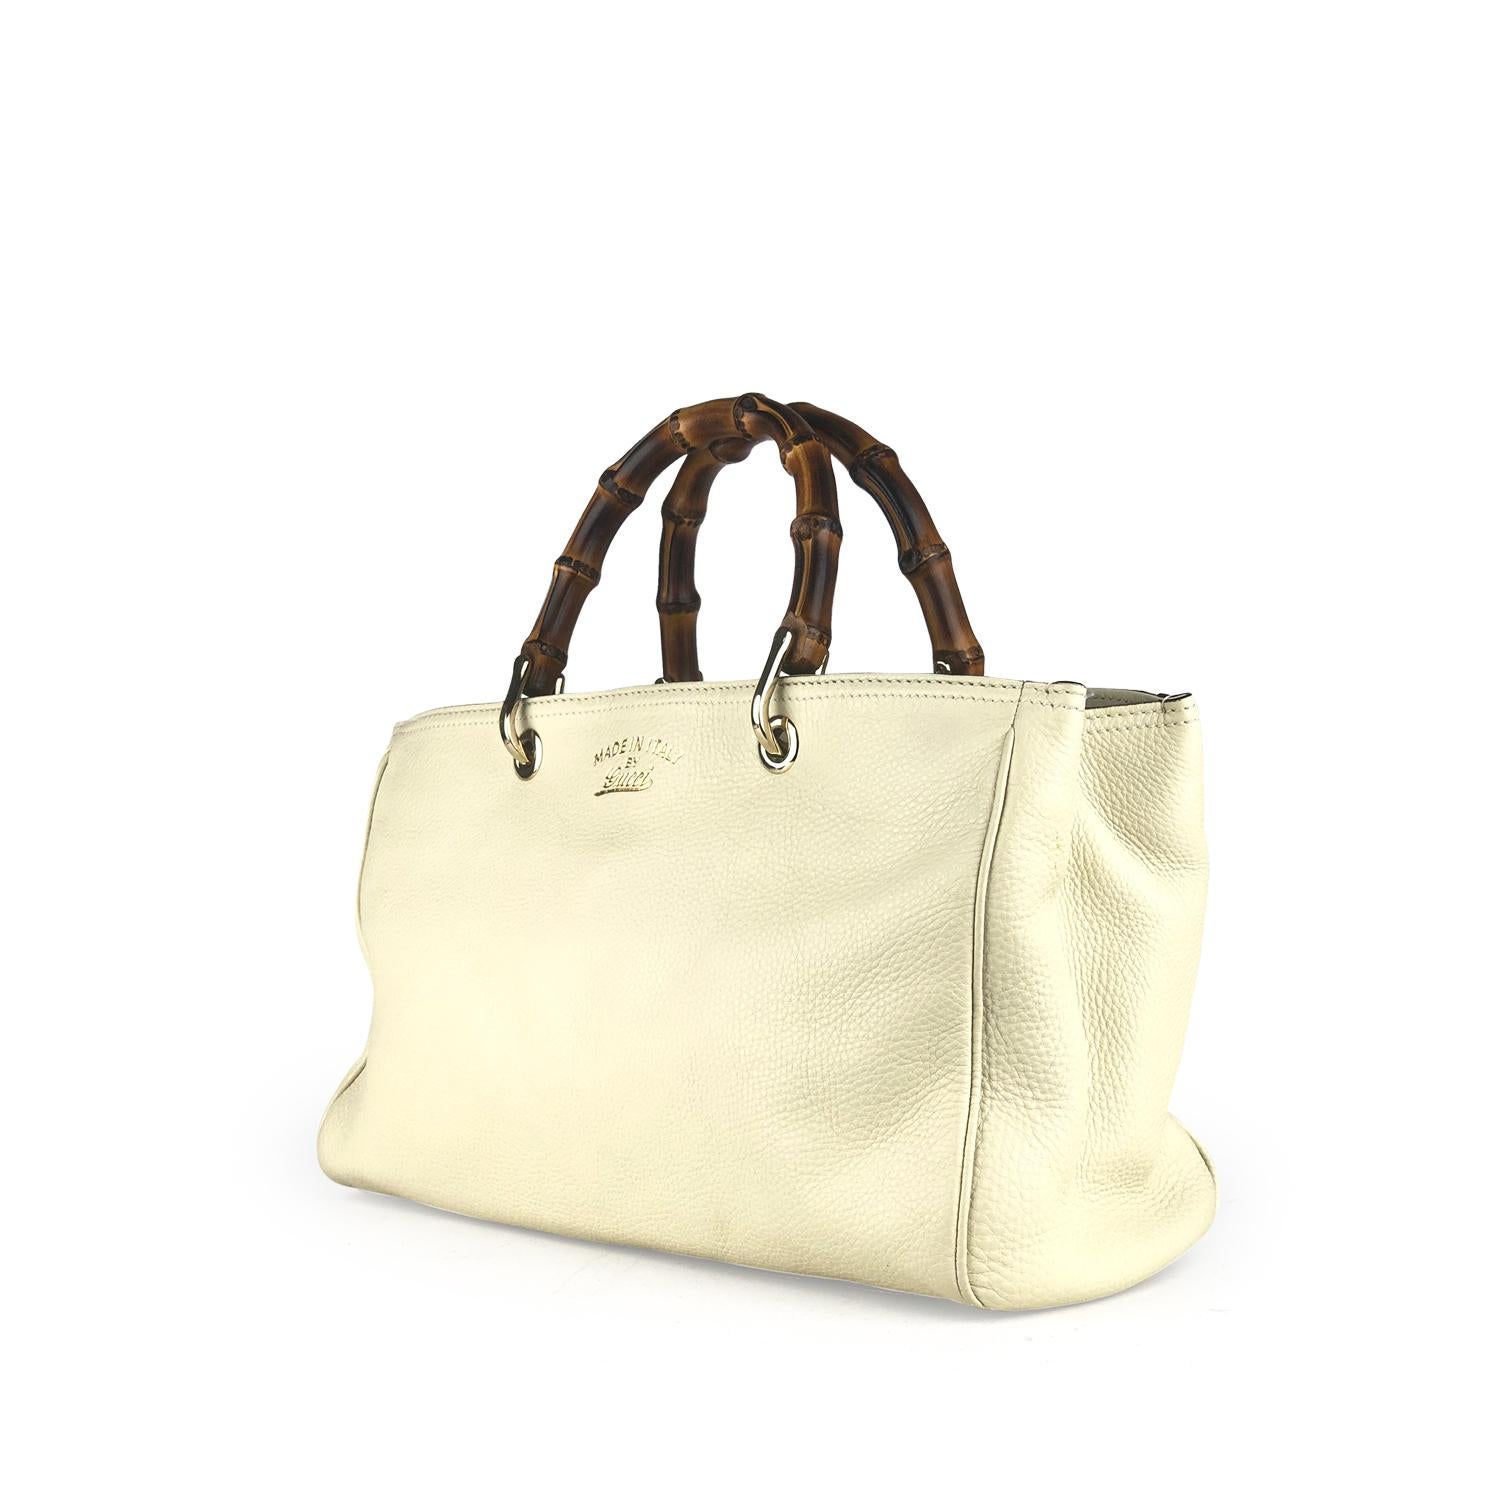 Cream leather Gucci Medium Soho tote with

– Brushed gold-tone hardware
– Dual bamboo top handles
– Single flat shoulder strap
– Protective feet at base, tonal canvas lining, three interior compartments; one with zip closure, four pockets at